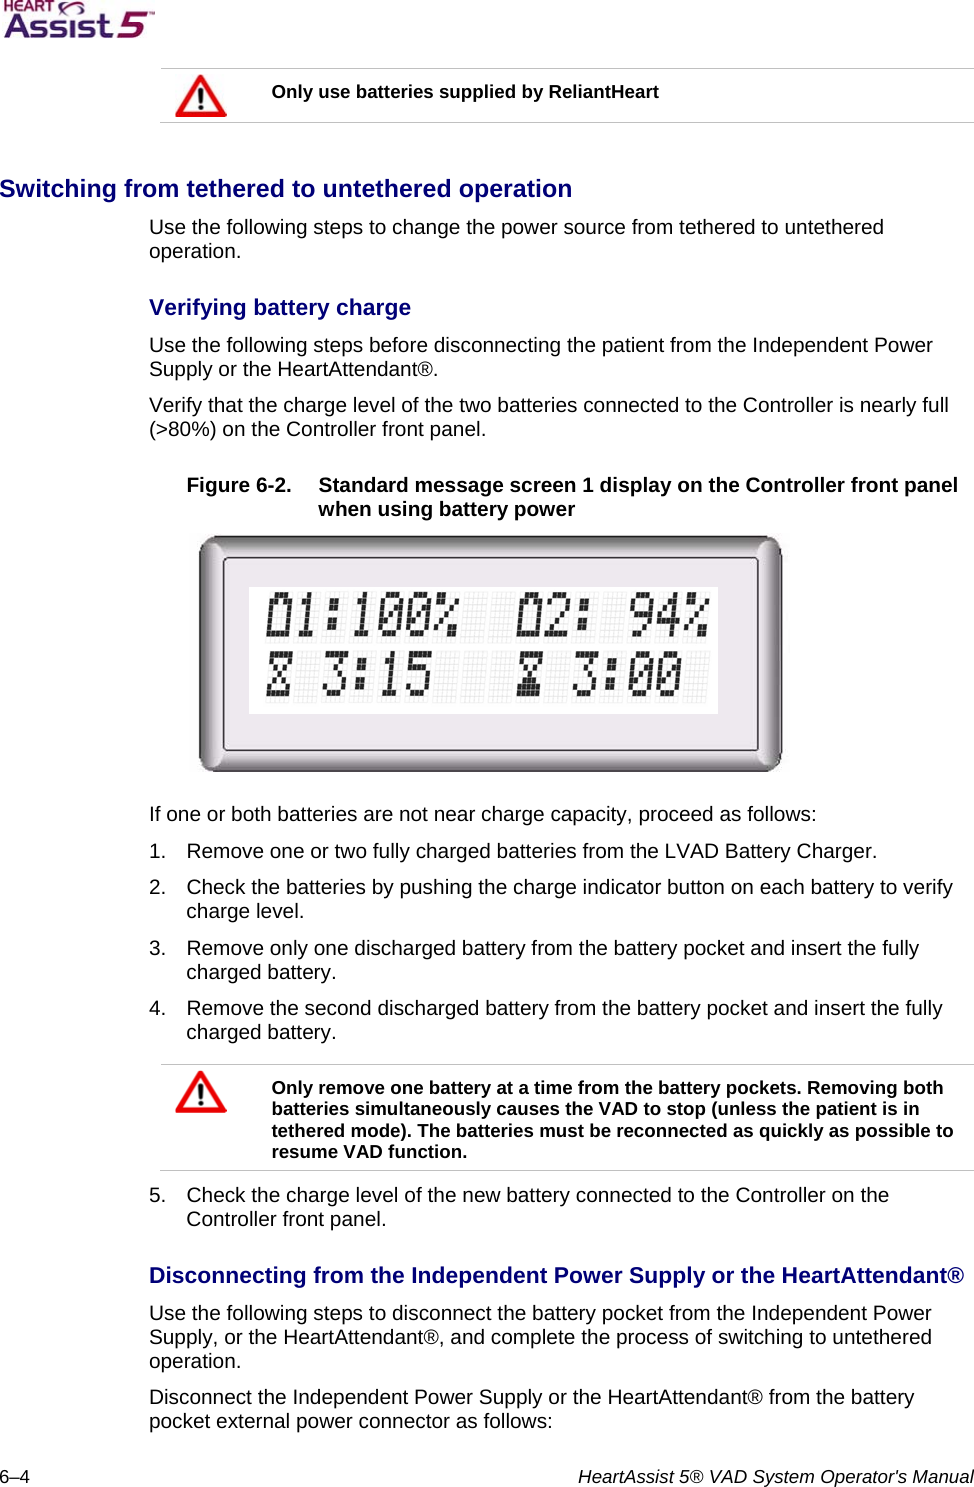   6–4  HeartAssist 5® VAD System Operator&apos;s Manual  Only use batteries supplied by ReliantHeart  Switching from tethered to untethered operation  Use the following steps to change the power source from tethered to untethered operation.  Verifying battery charge  Use the following steps before disconnecting the patient from the Independent Power Supply or the HeartAttendant®.  Verify that the charge level of the two batteries connected to the Controller is nearly full (&gt;80%) on the Controller front panel.   Figure 6-2.  Standard message screen 1 display on the Controller front panel when using battery power   If one or both batteries are not near charge capacity, proceed as follows:  1.  Remove one or two fully charged batteries from the LVAD Battery Charger.  2.  Check the batteries by pushing the charge indicator button on each battery to verify charge level.  3.  Remove only one discharged battery from the battery pocket and insert the fully charged battery.  4.  Remove the second discharged battery from the battery pocket and insert the fully charged battery.    Only remove one battery at a time from the battery pockets. Removing both batteries simultaneously causes the VAD to stop (unless the patient is in tethered mode). The batteries must be reconnected as quickly as possible to resume VAD function.  5.  Check the charge level of the new battery connected to the Controller on the Controller front panel.  Disconnecting from the Independent Power Supply or the HeartAttendant®  Use the following steps to disconnect the battery pocket from the Independent Power Supply, or the HeartAttendant®, and complete the process of switching to untethered operation.  Disconnect the Independent Power Supply or the HeartAttendant® from the battery pocket external power connector as follows:   